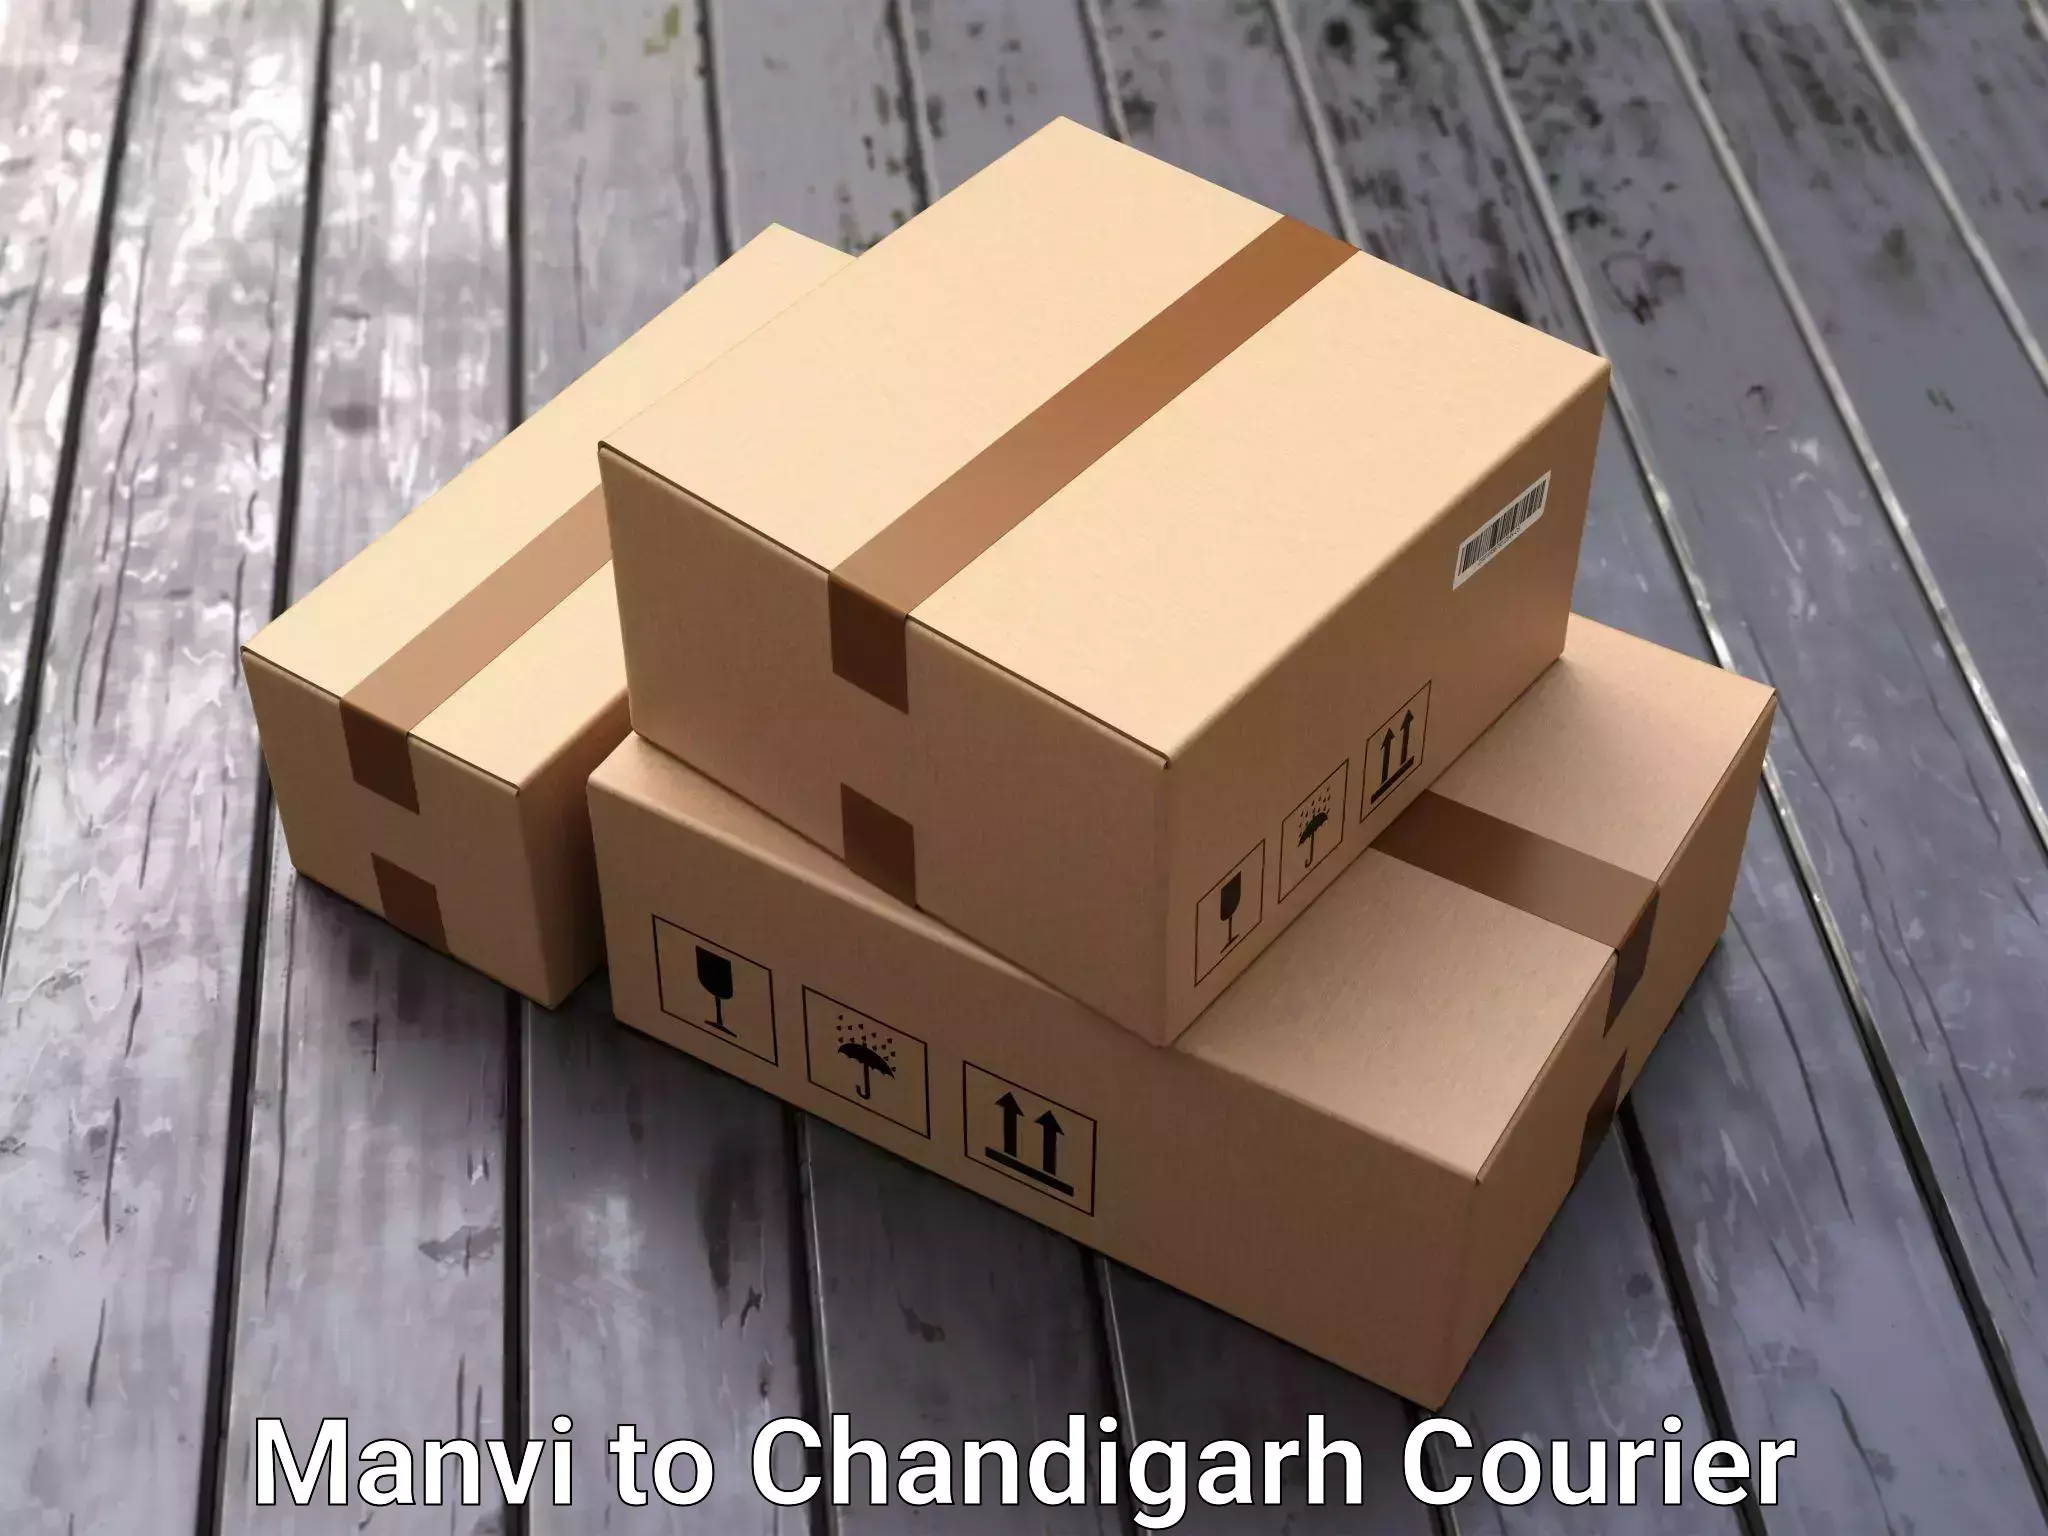 Specialized moving company Manvi to Chandigarh